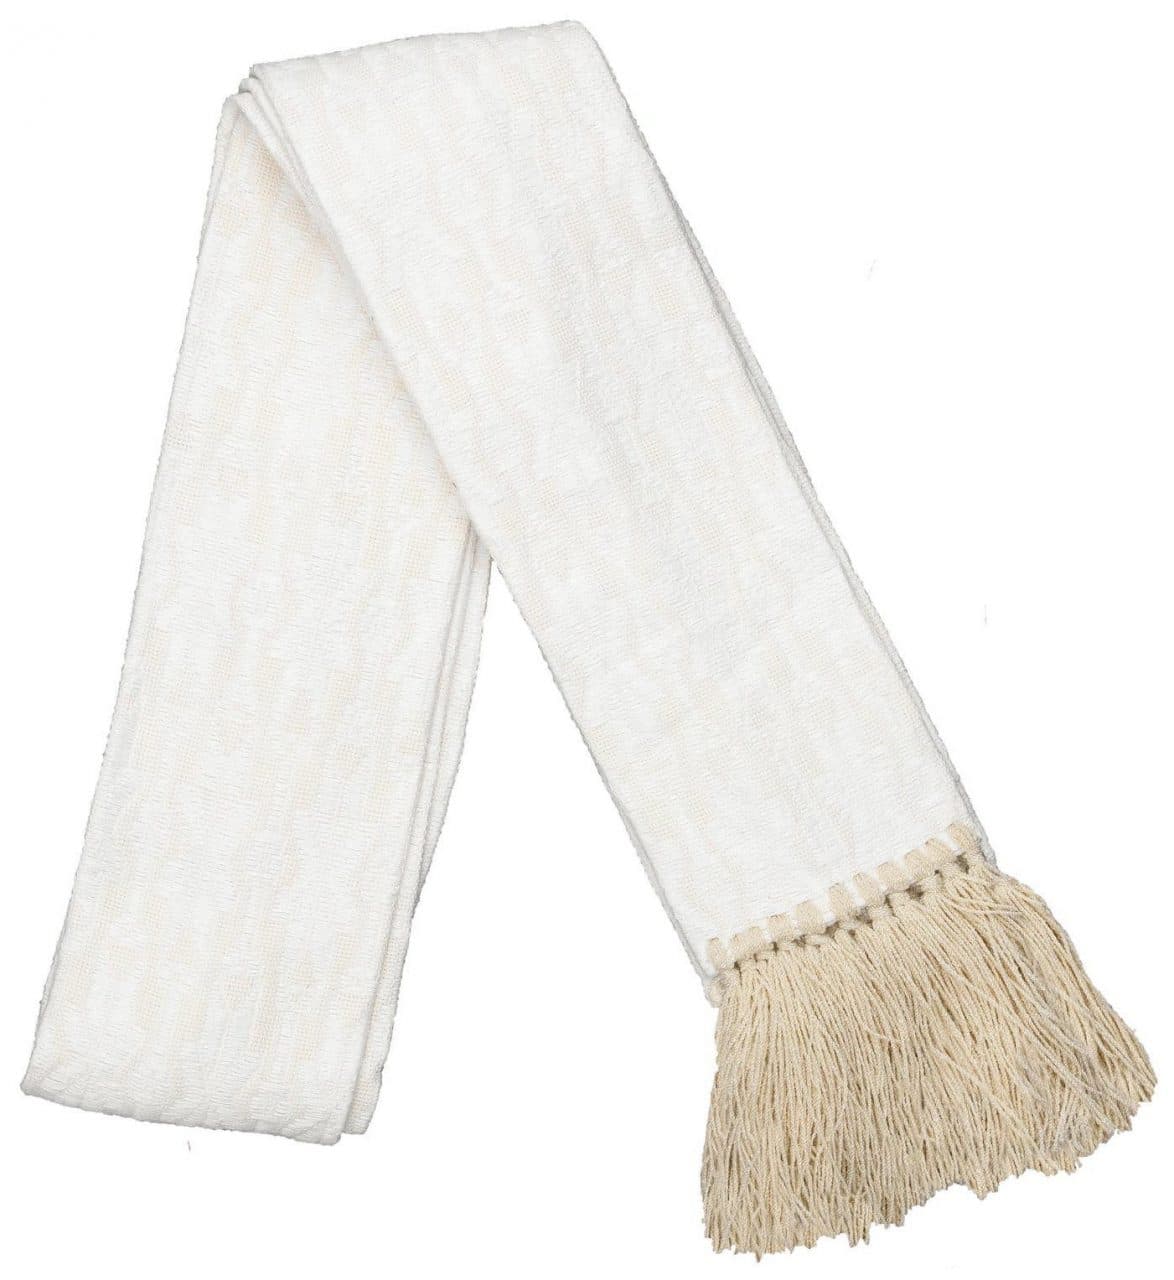 Brocaded Clerical Stole - White